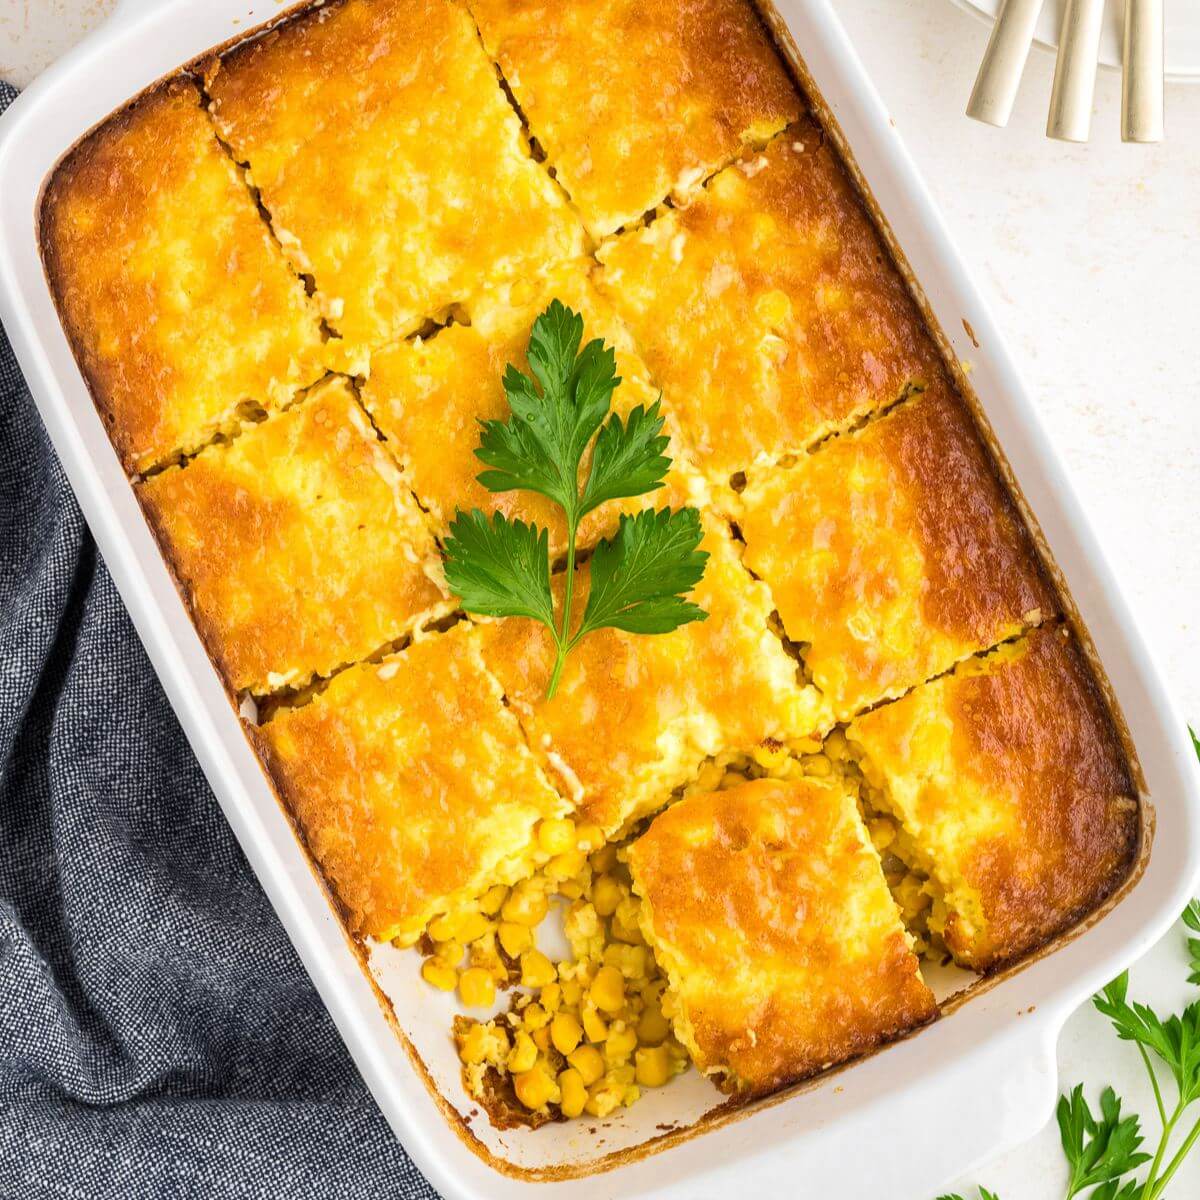 Corn pudding in a casserole dish with a piece being taken out.